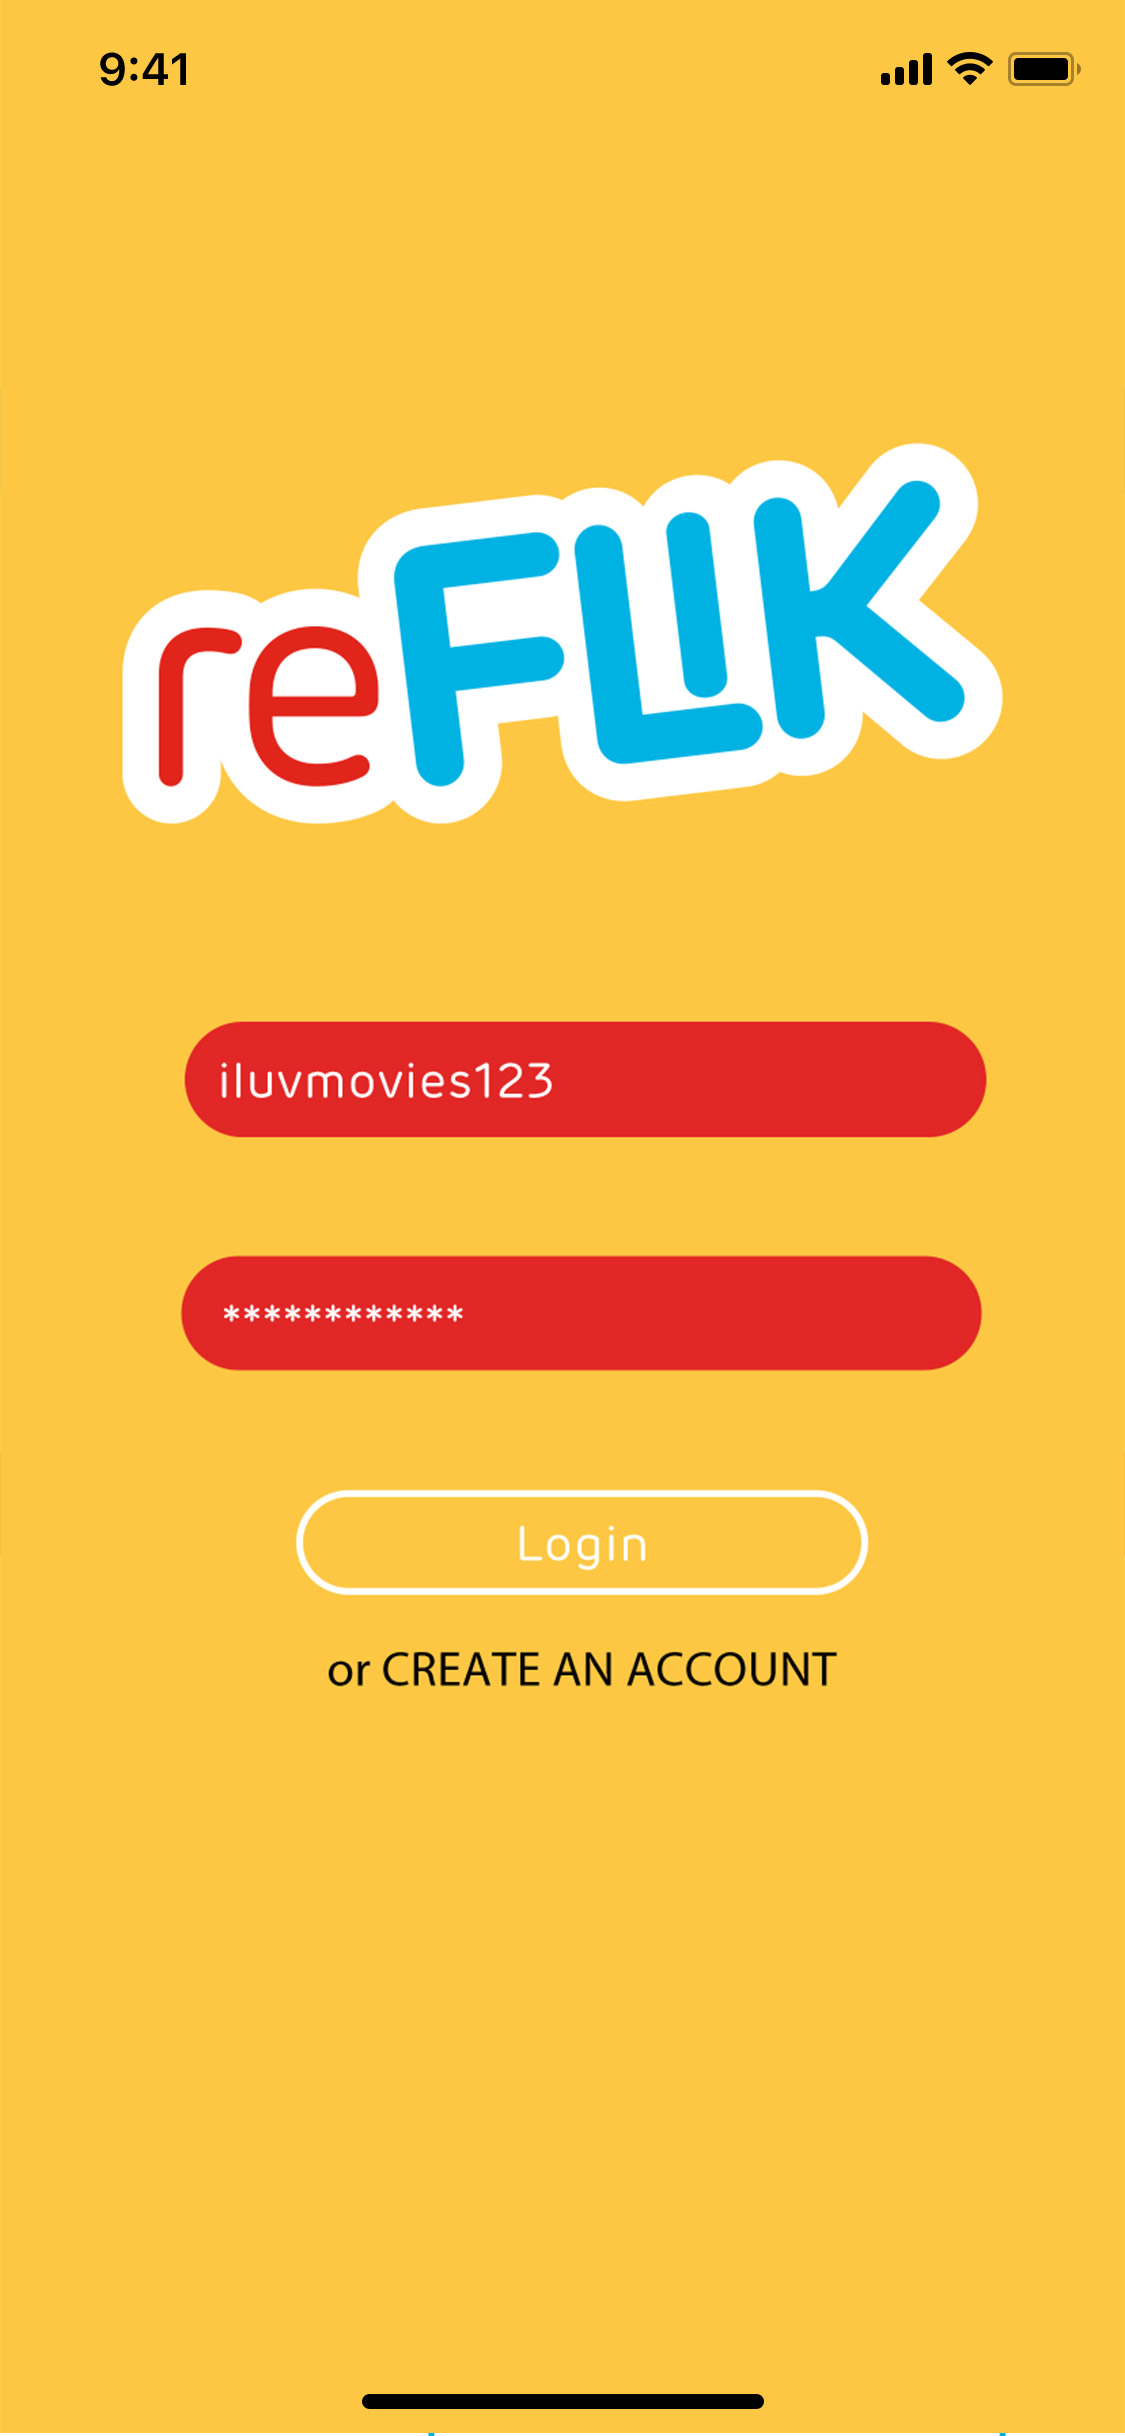 First version of login page for reFLIK app